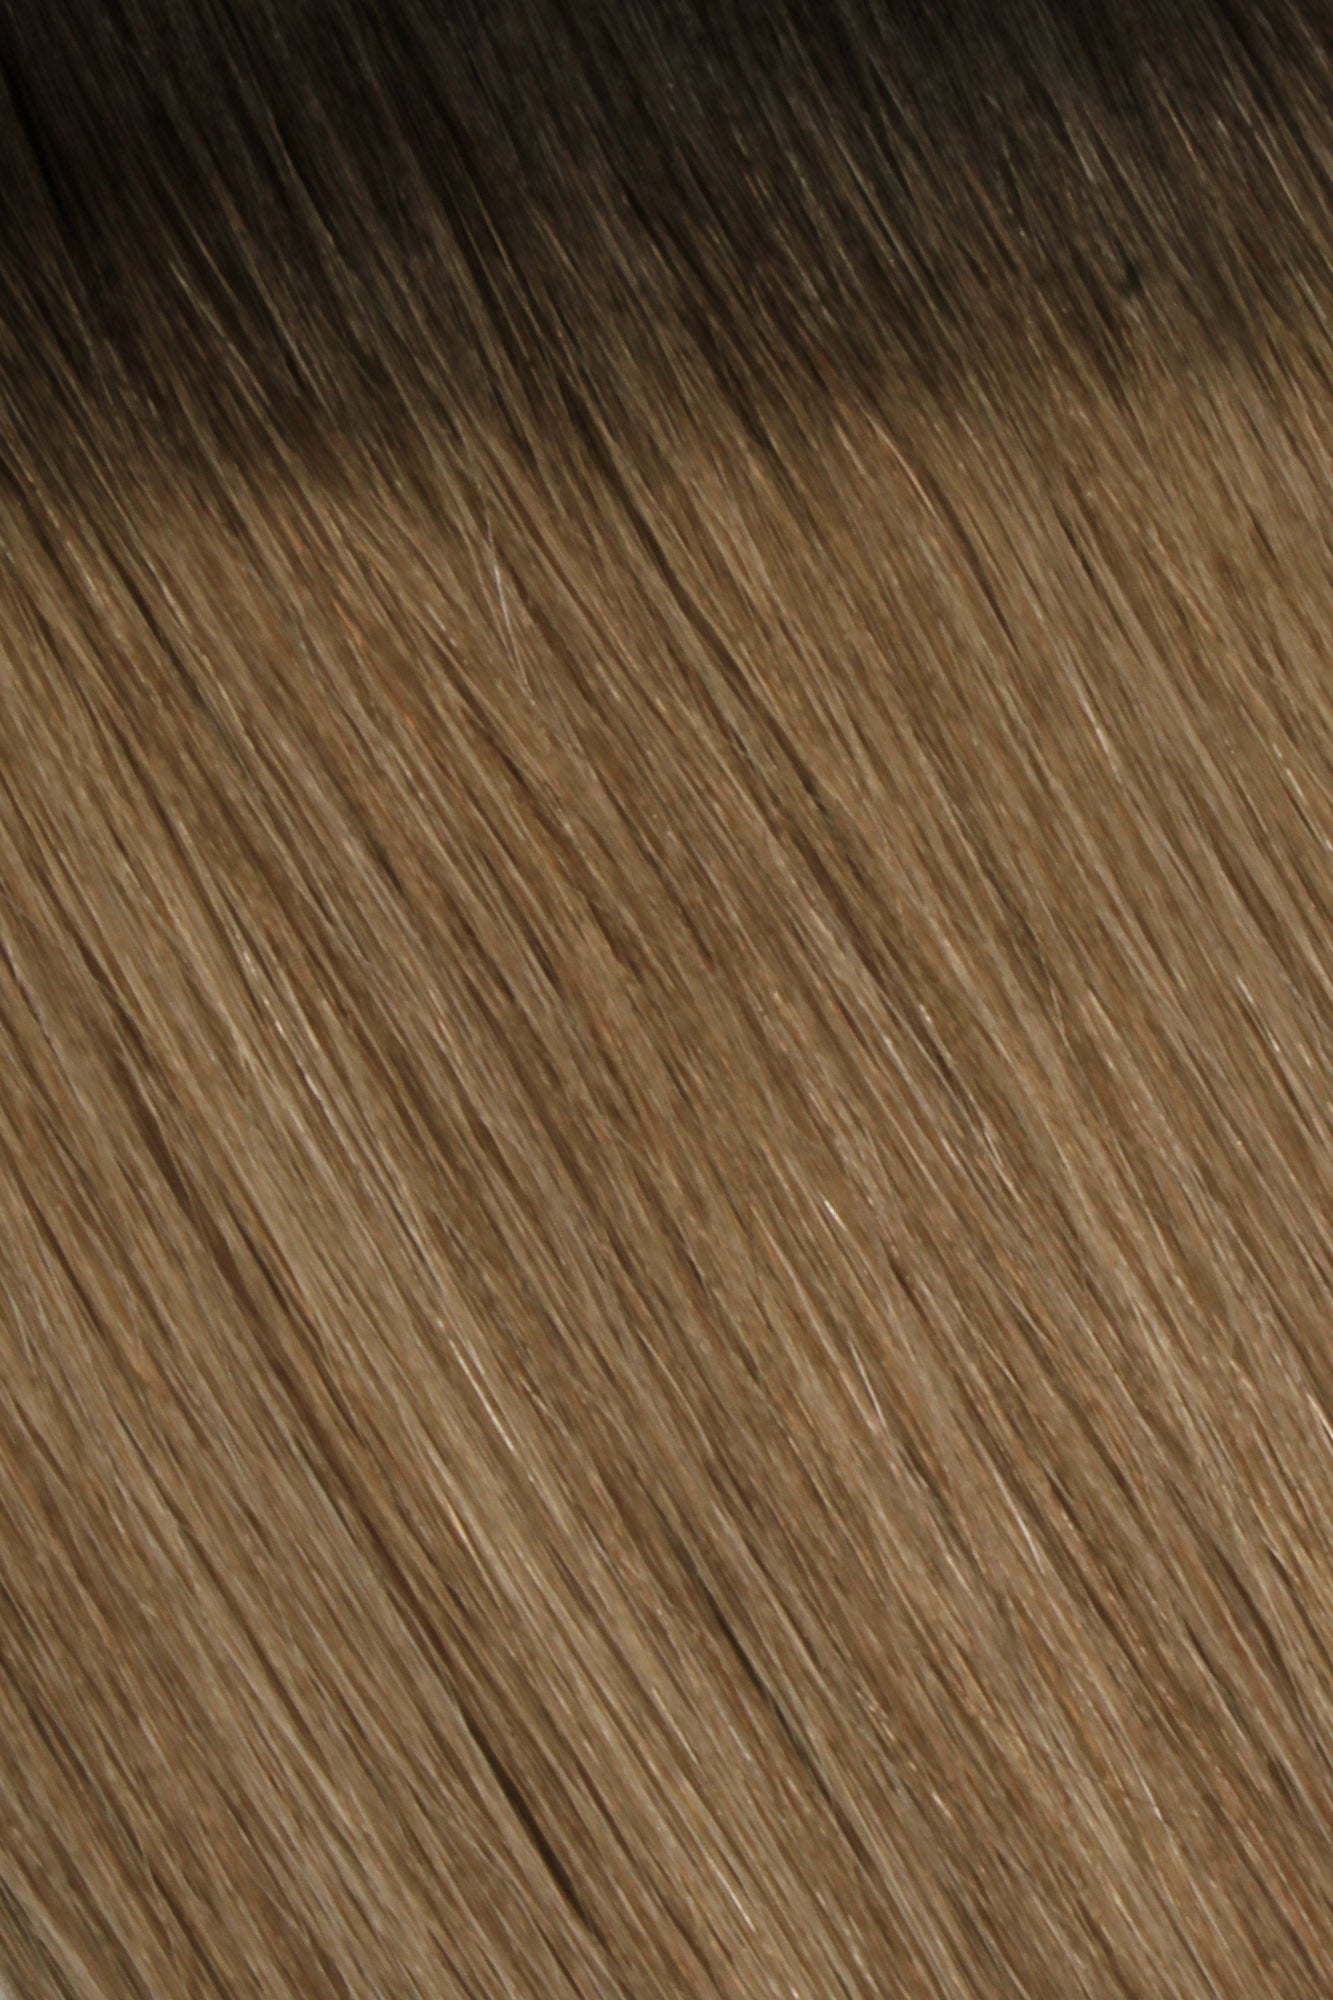 Tiny Tip Bonds 18&quot; -  SWAY Hair Extensions Mochaccino-Melt: Lightweight, discreet. Made with Italian Keratin for comfort and long-lasting wear. Reusable and compatible with other SWAY Salon Professional Methods